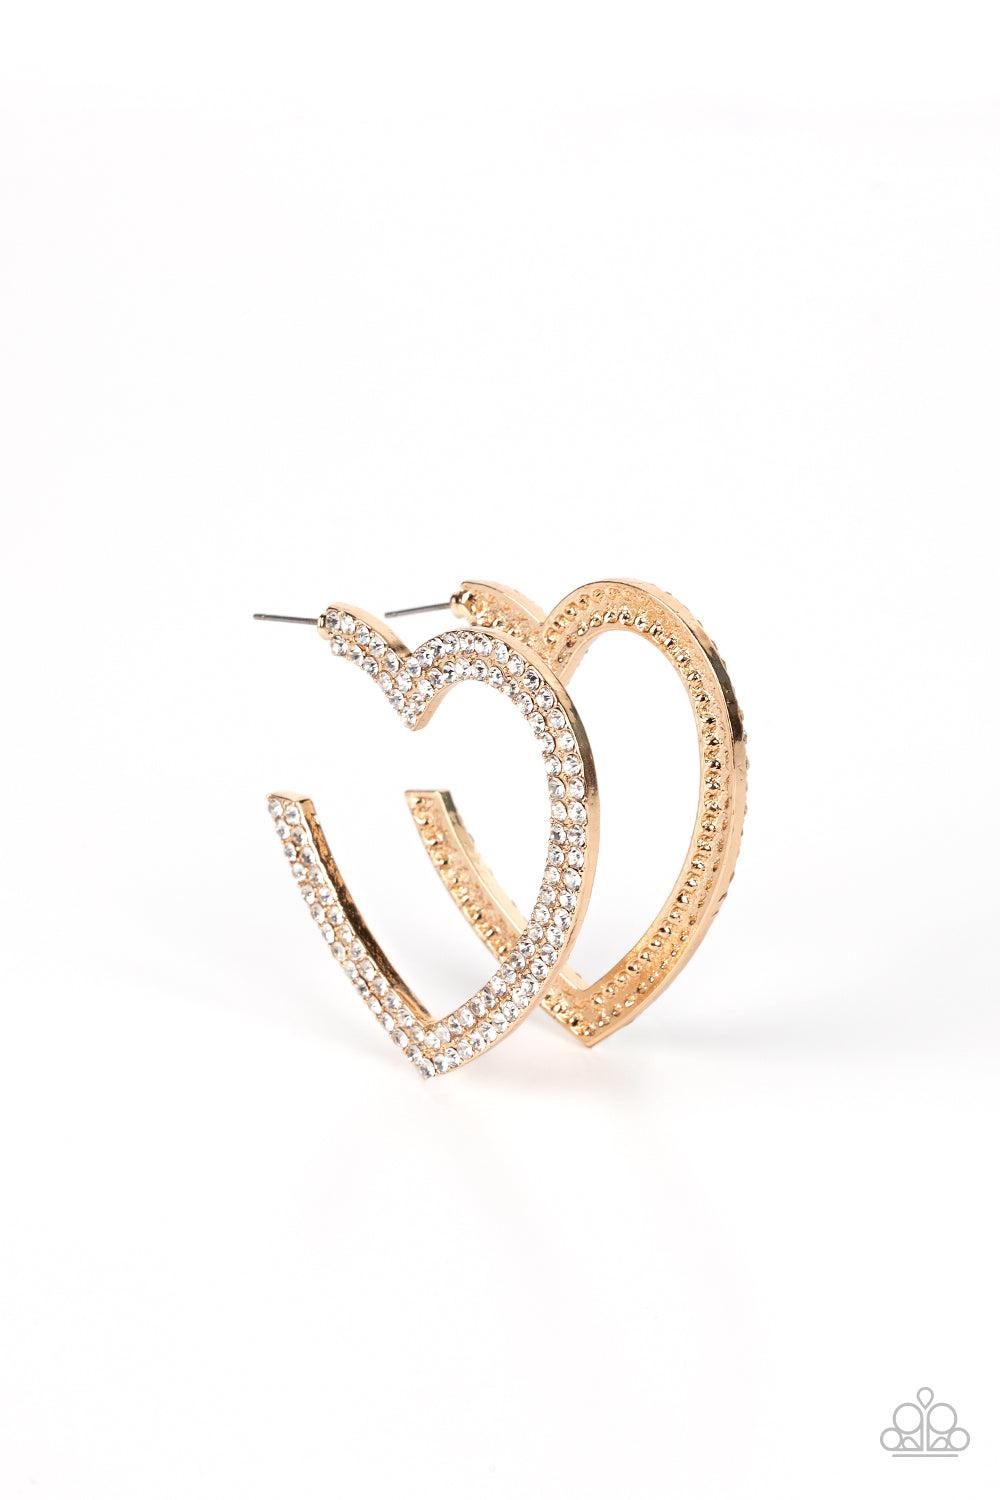 AMORE to Love Gold and White Rhinestone Heart Earrings - Paparazzi Accessories- lightbox - CarasShop.com - $5 Jewelry by Cara Jewels